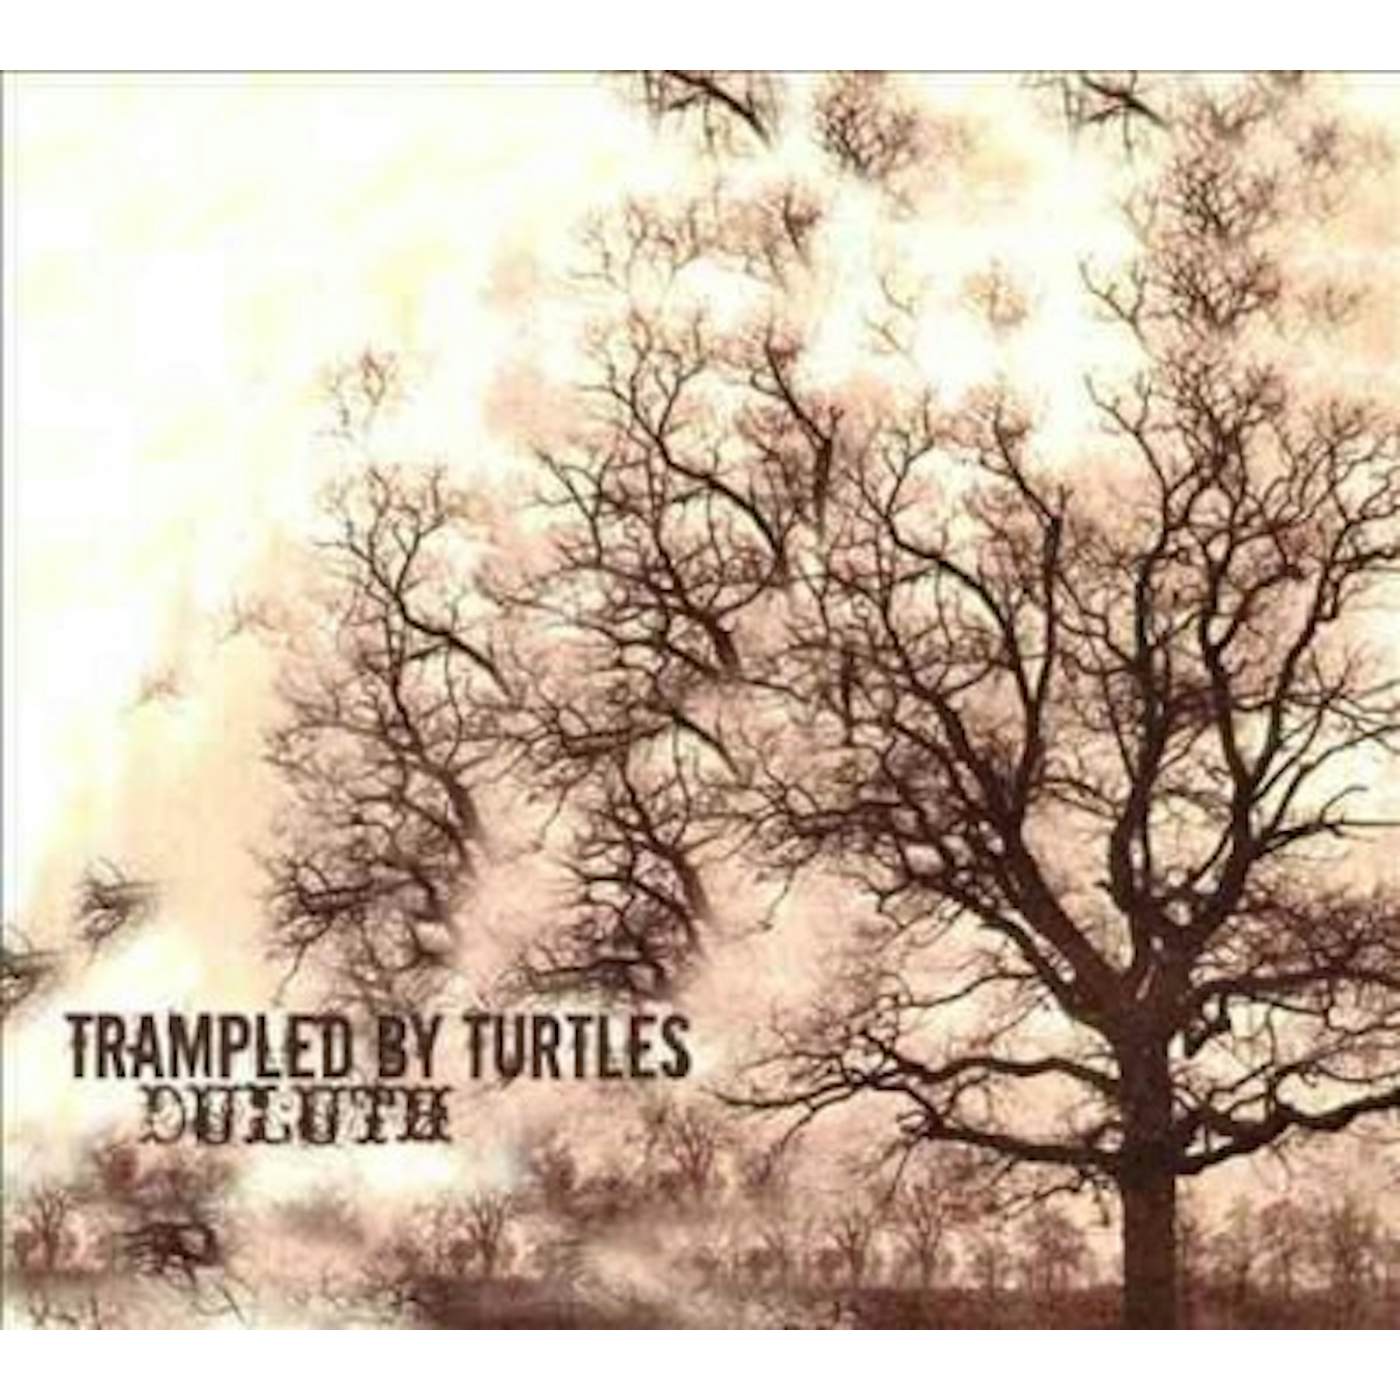 Trampled by Turtles Duluth Vinyl Record